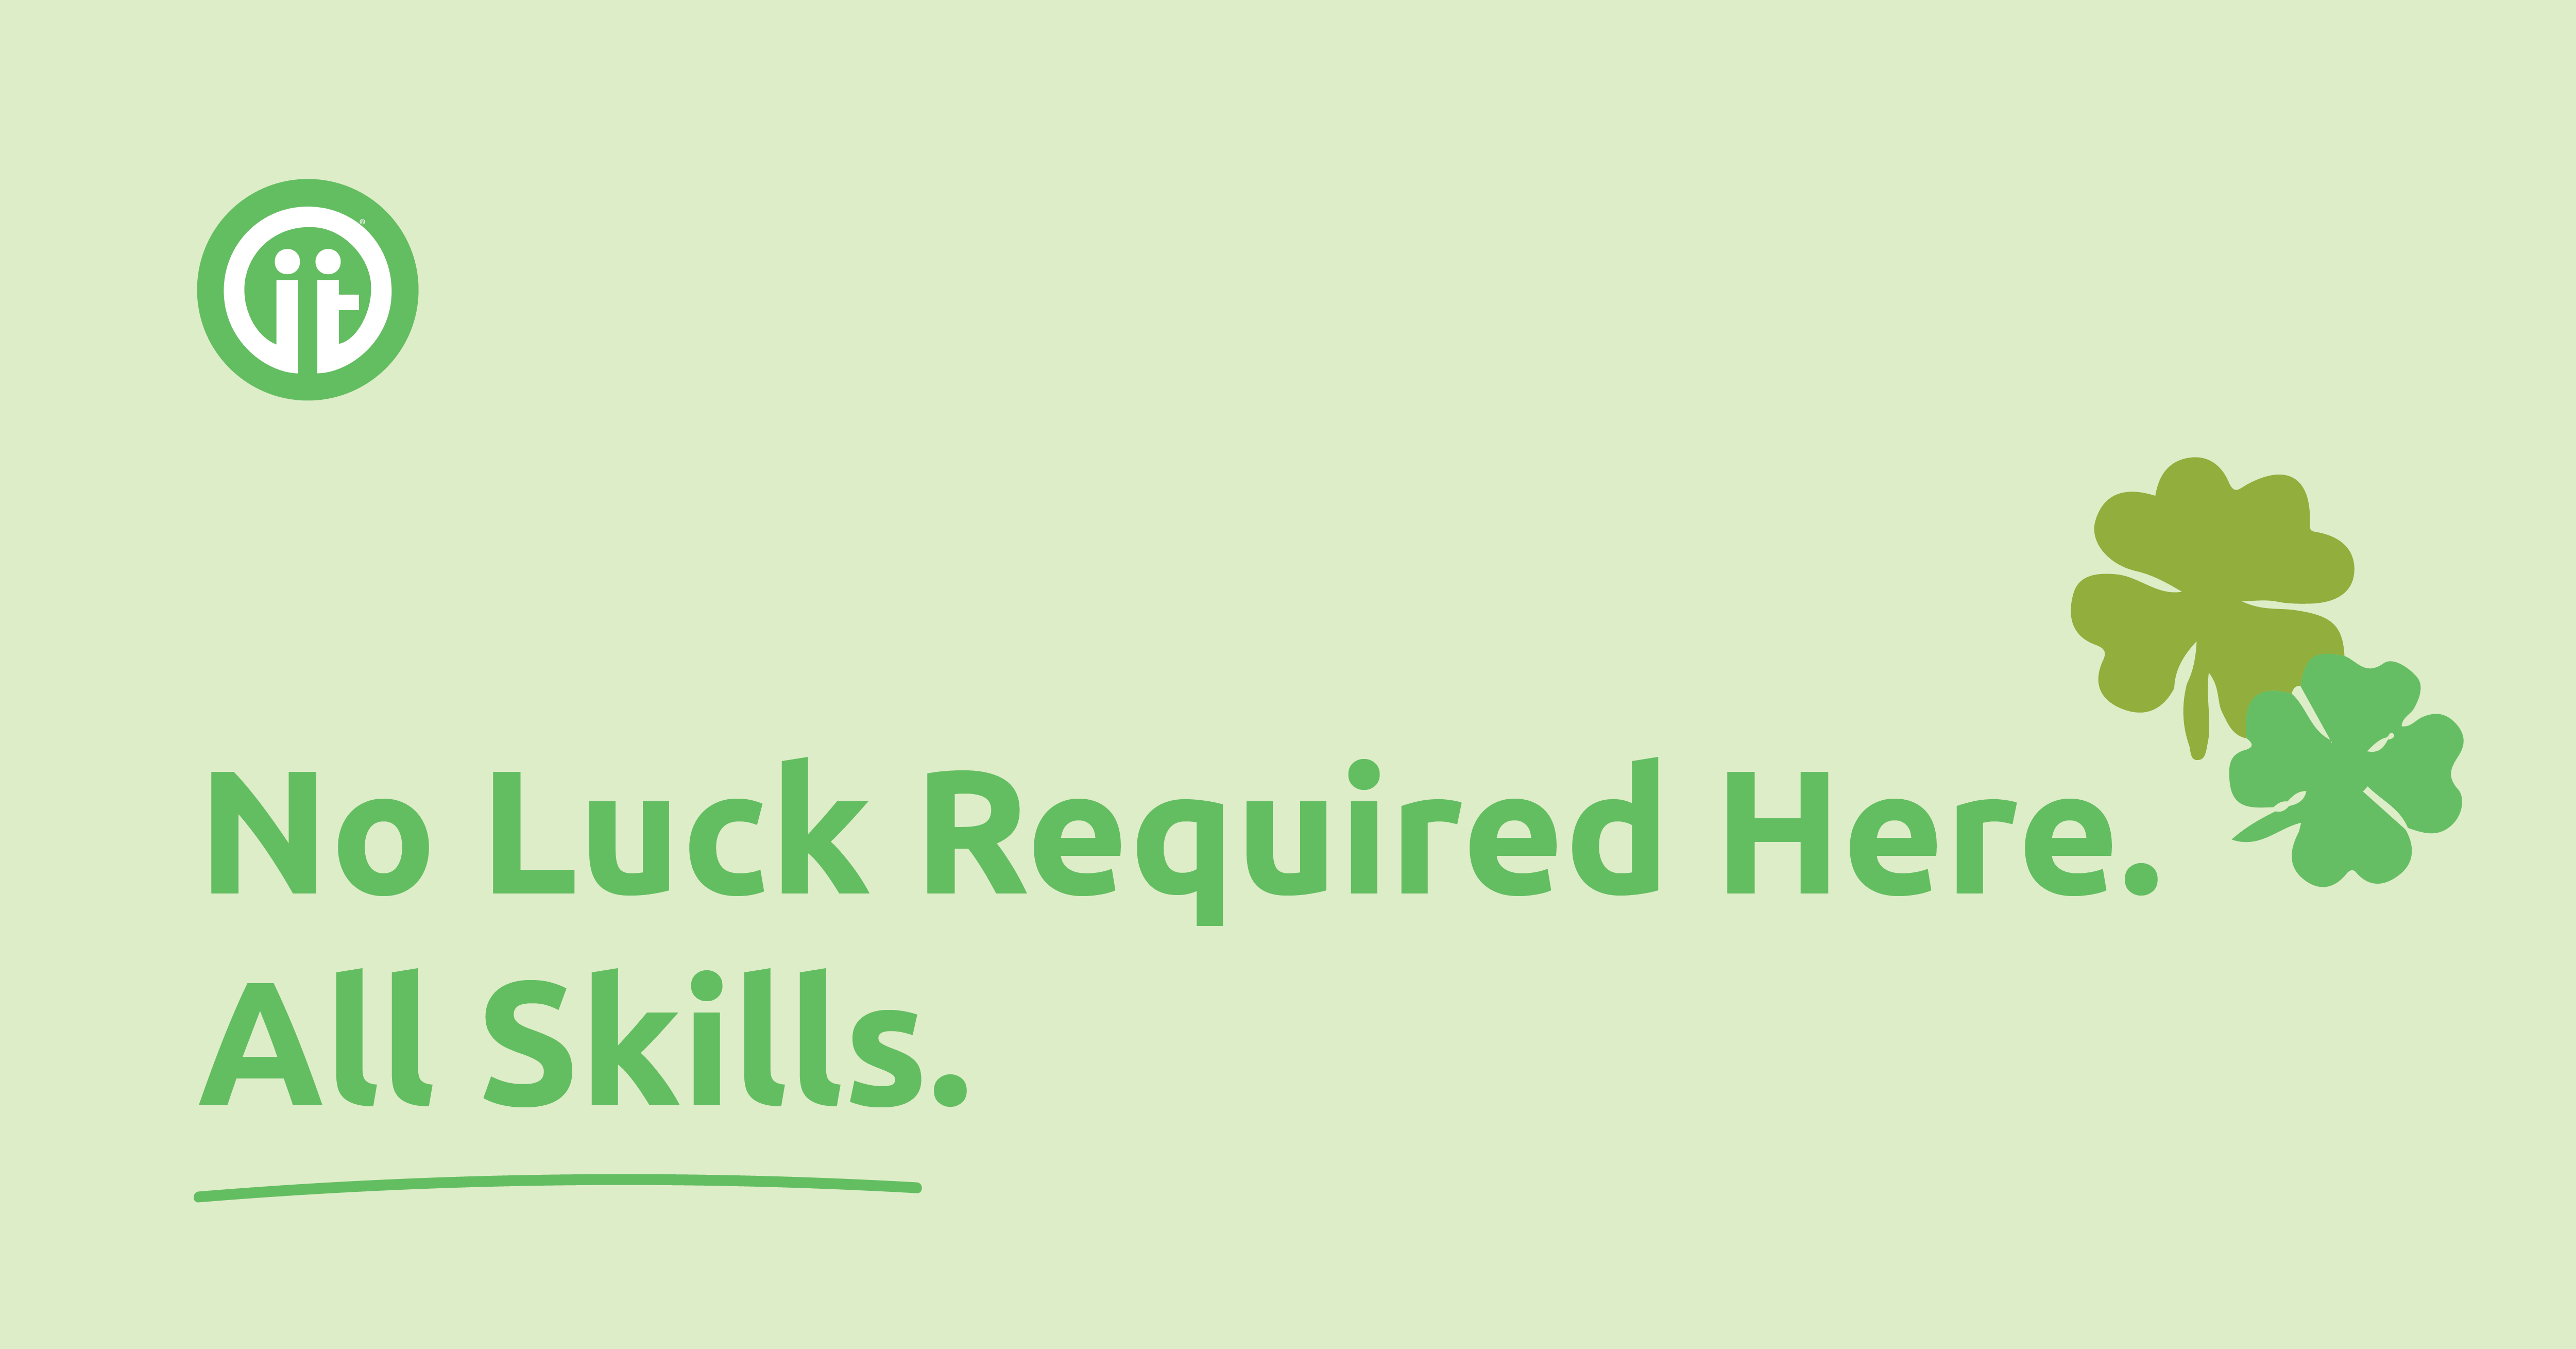 Green banner with text: No luck required here. All skills.